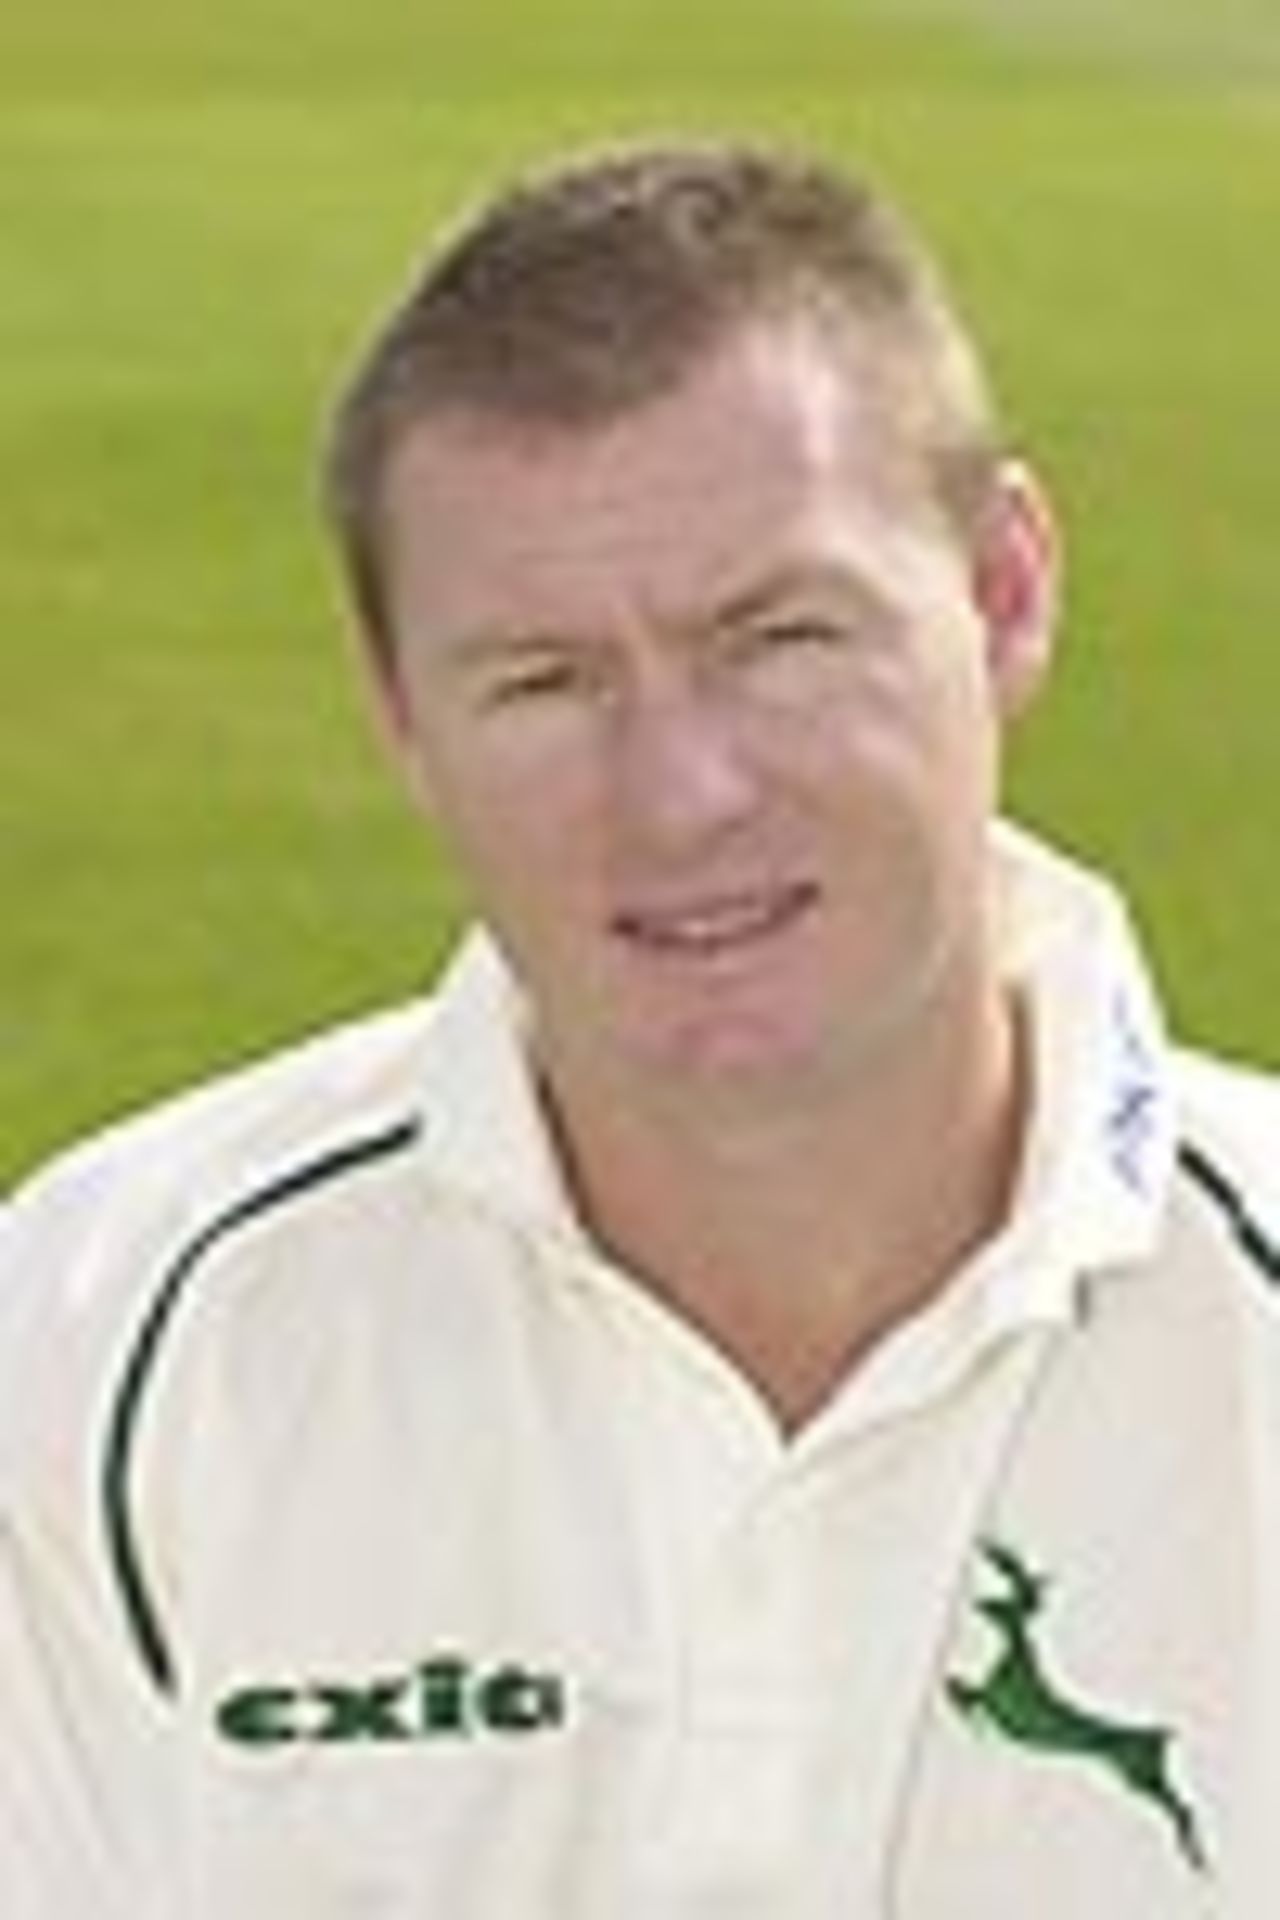 Taken at the 2002 Nottinghamshire photocall